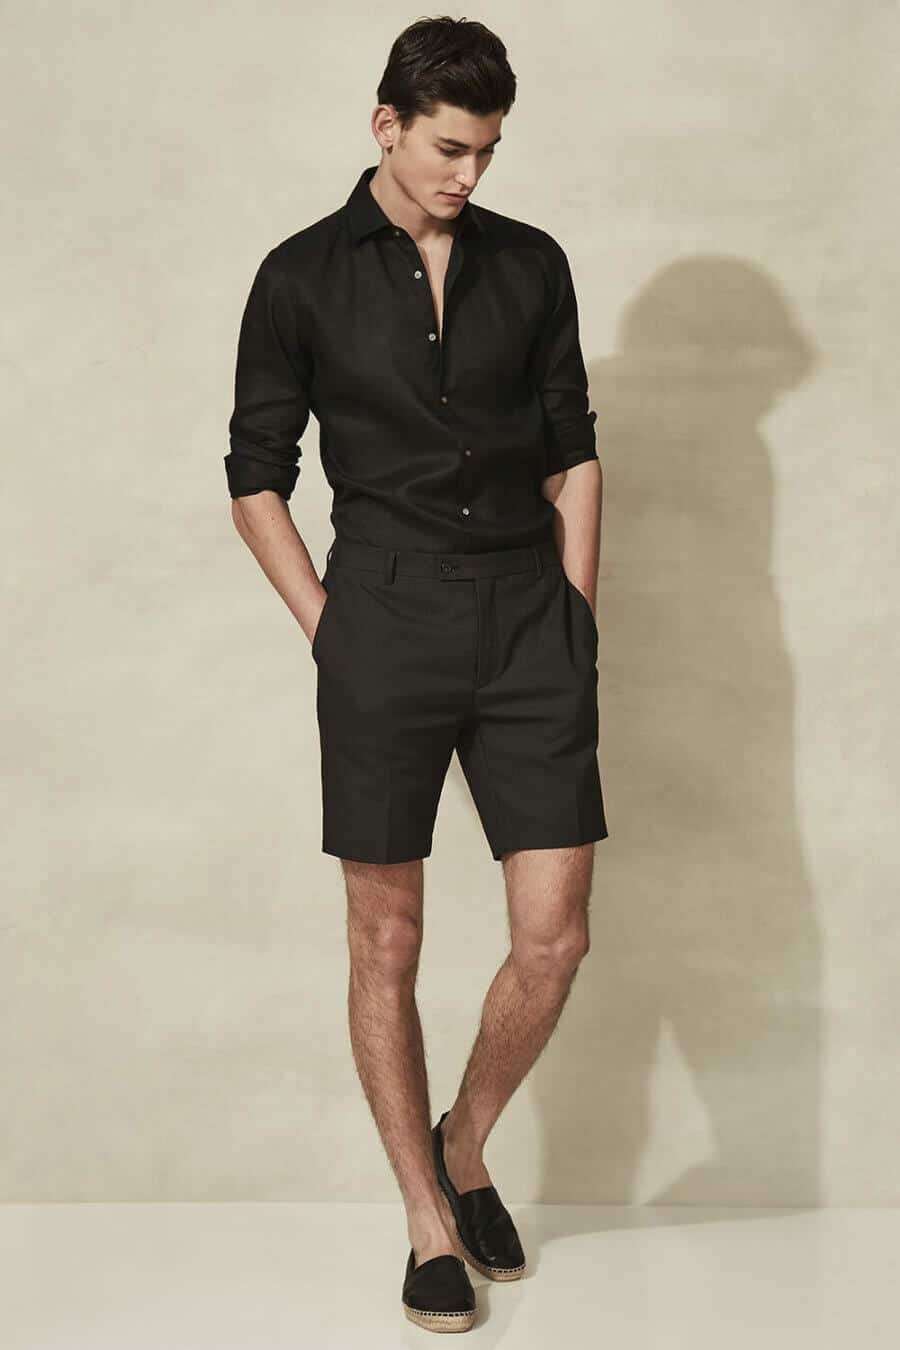 Men's summer outfit - black shirt, shorts and espadrilles